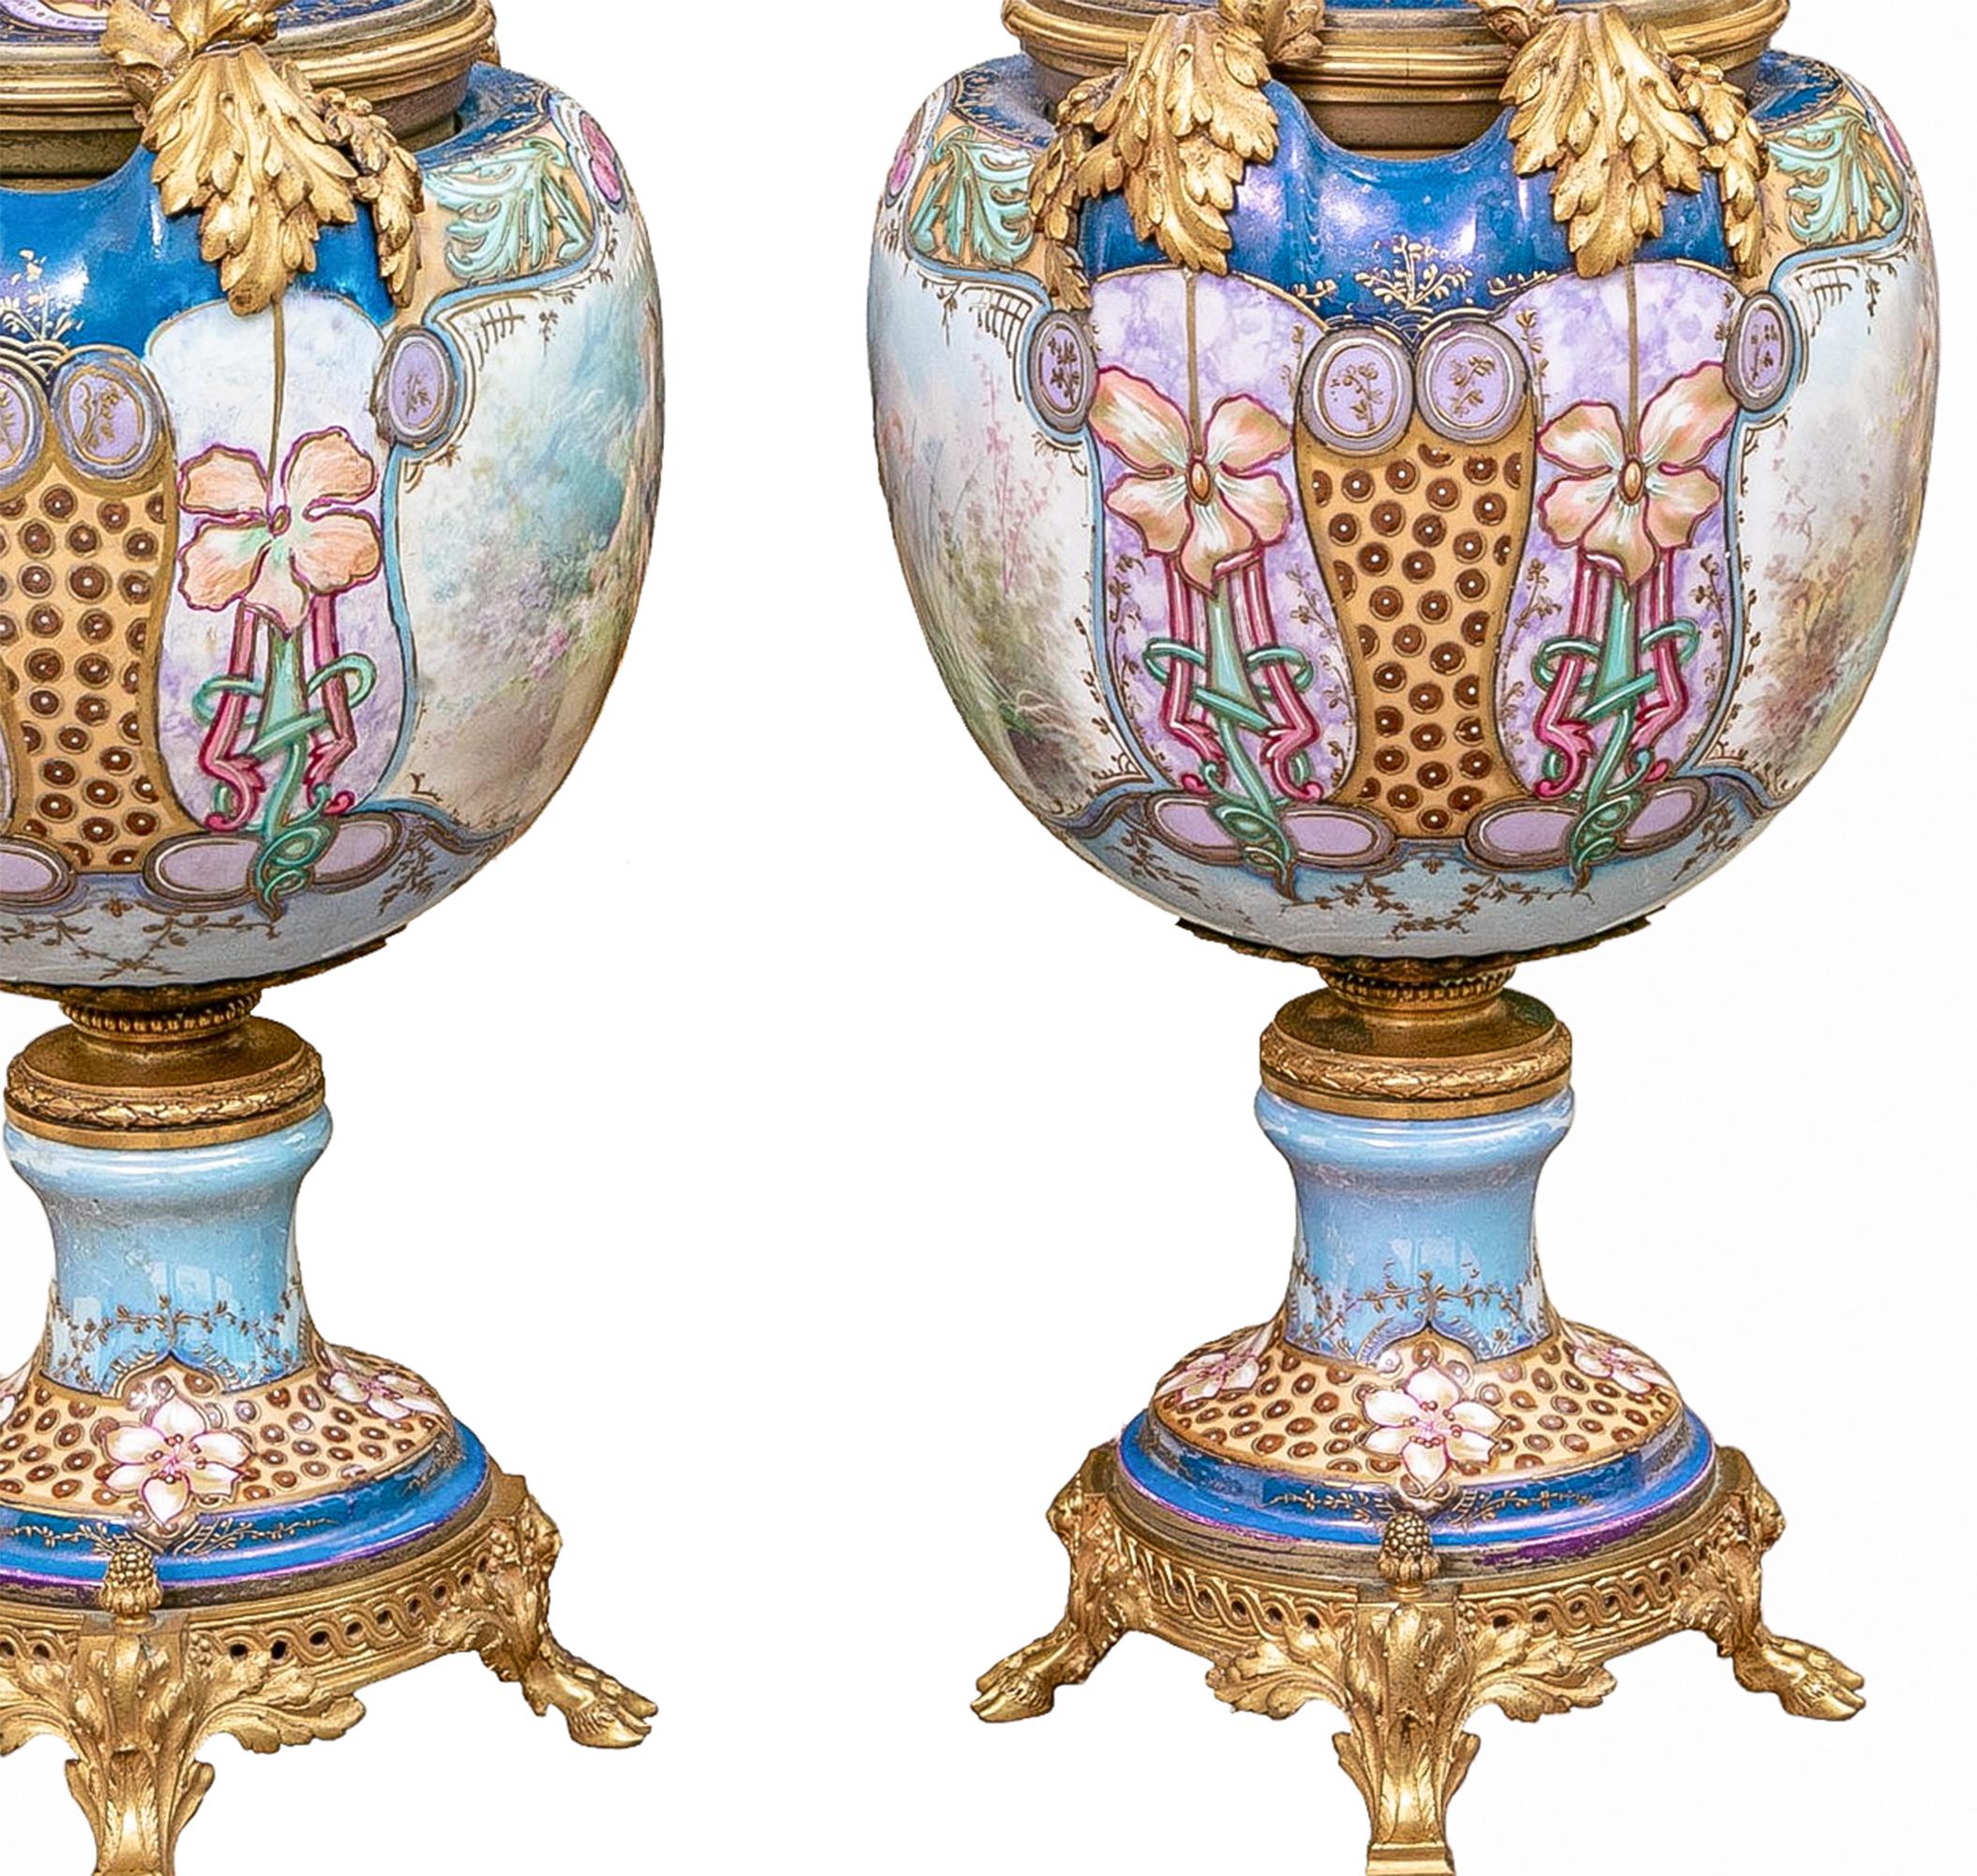 Hand-Painted  PAIR OF ART NOUVEAU INSPIRED ORMULU MOUNTED PORCELAIN URNS SIGNED by COLLOT